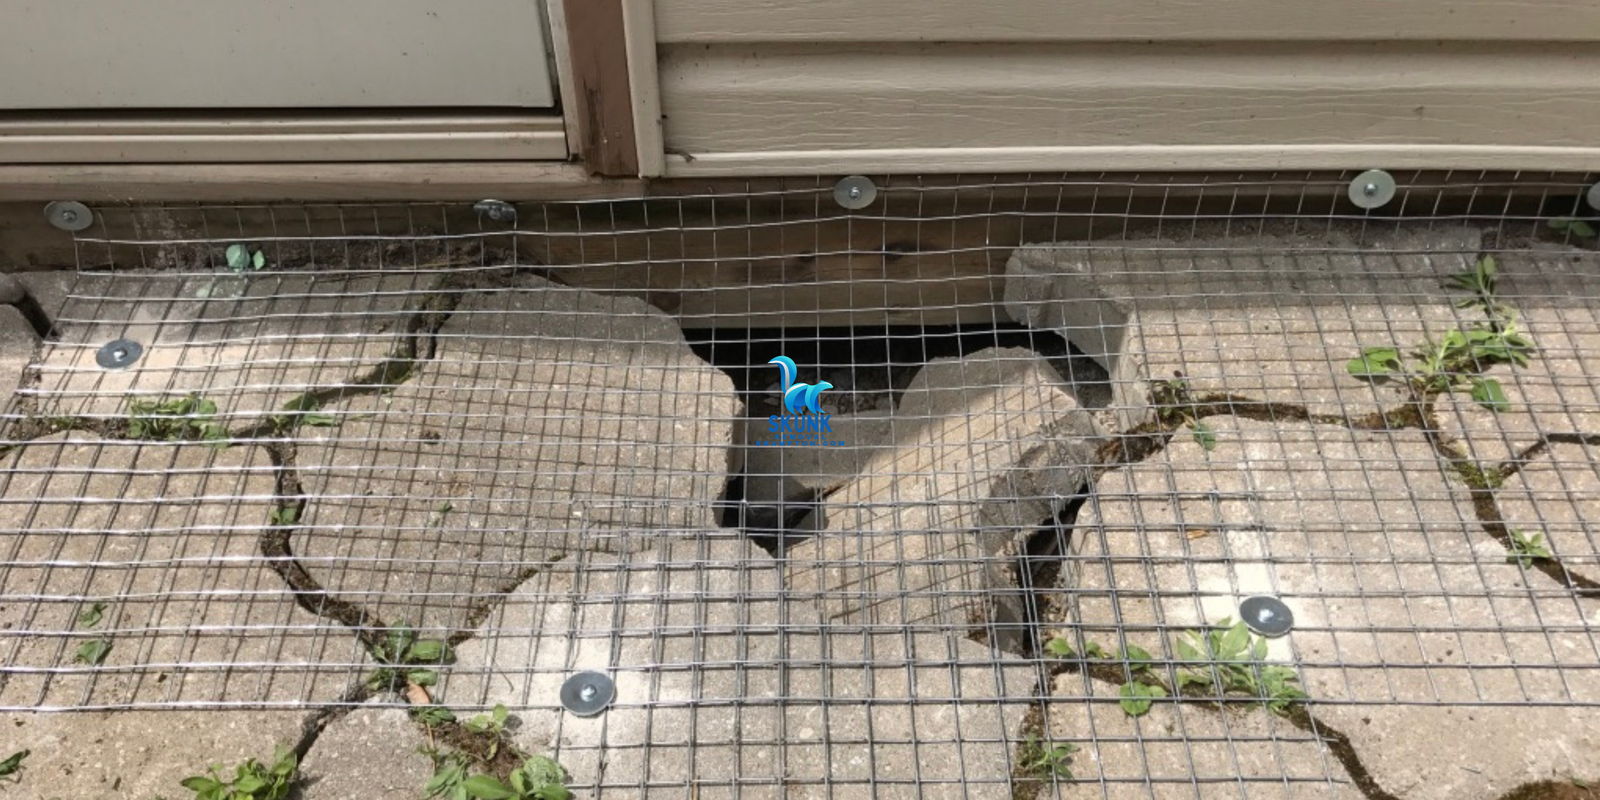 The Problem of Dead Skunks Under Your Porch or Deck